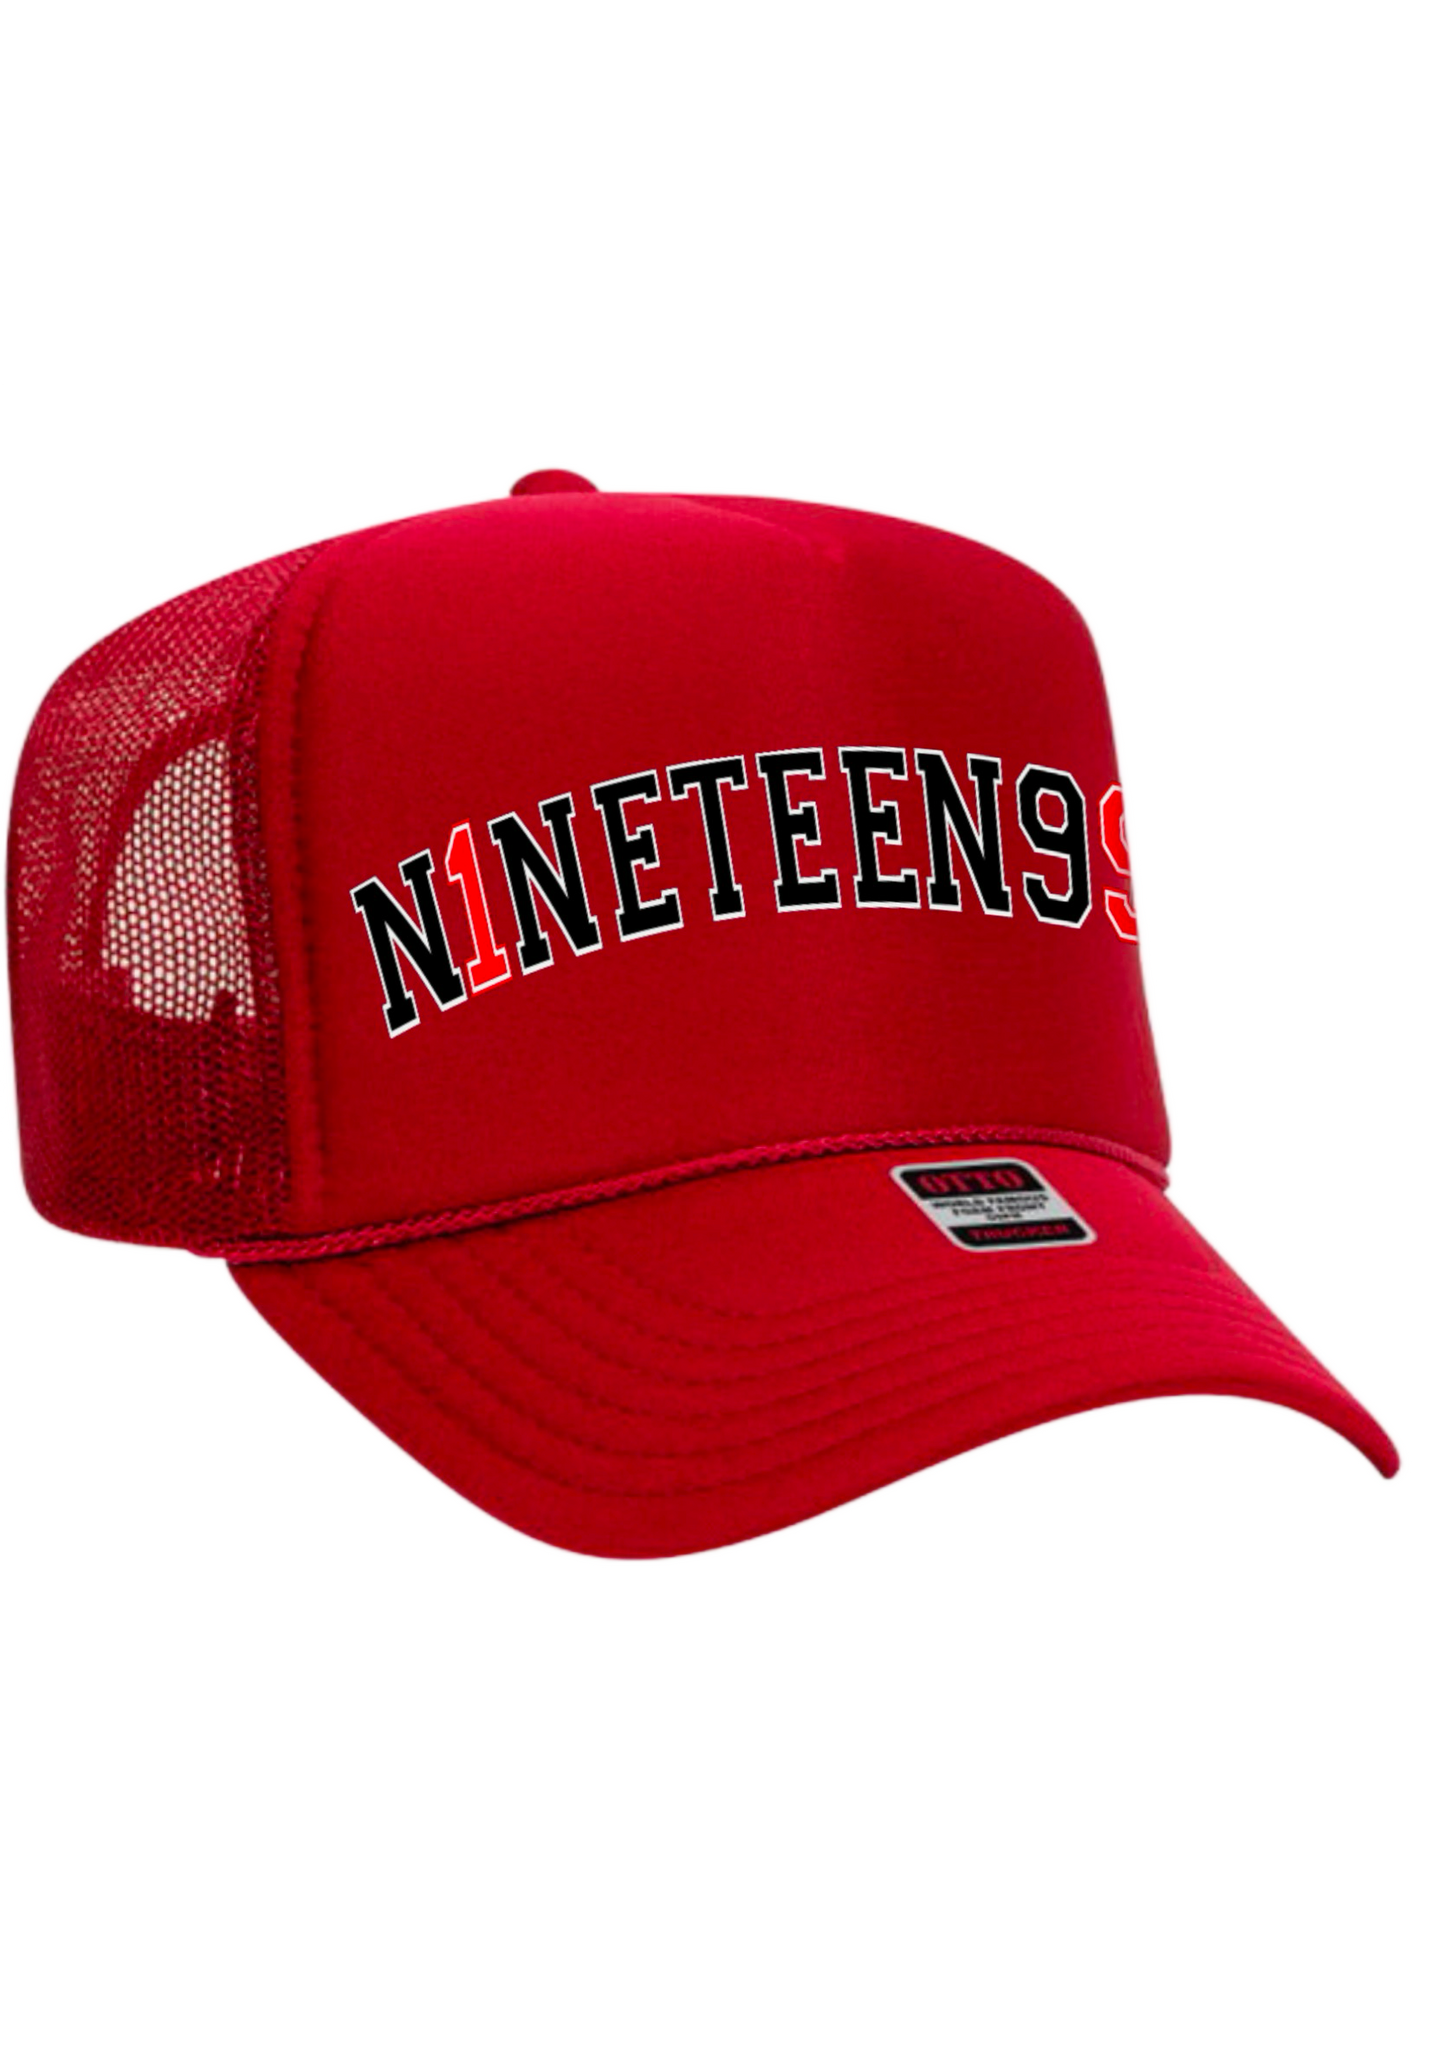 Red NineTeen99 Hat